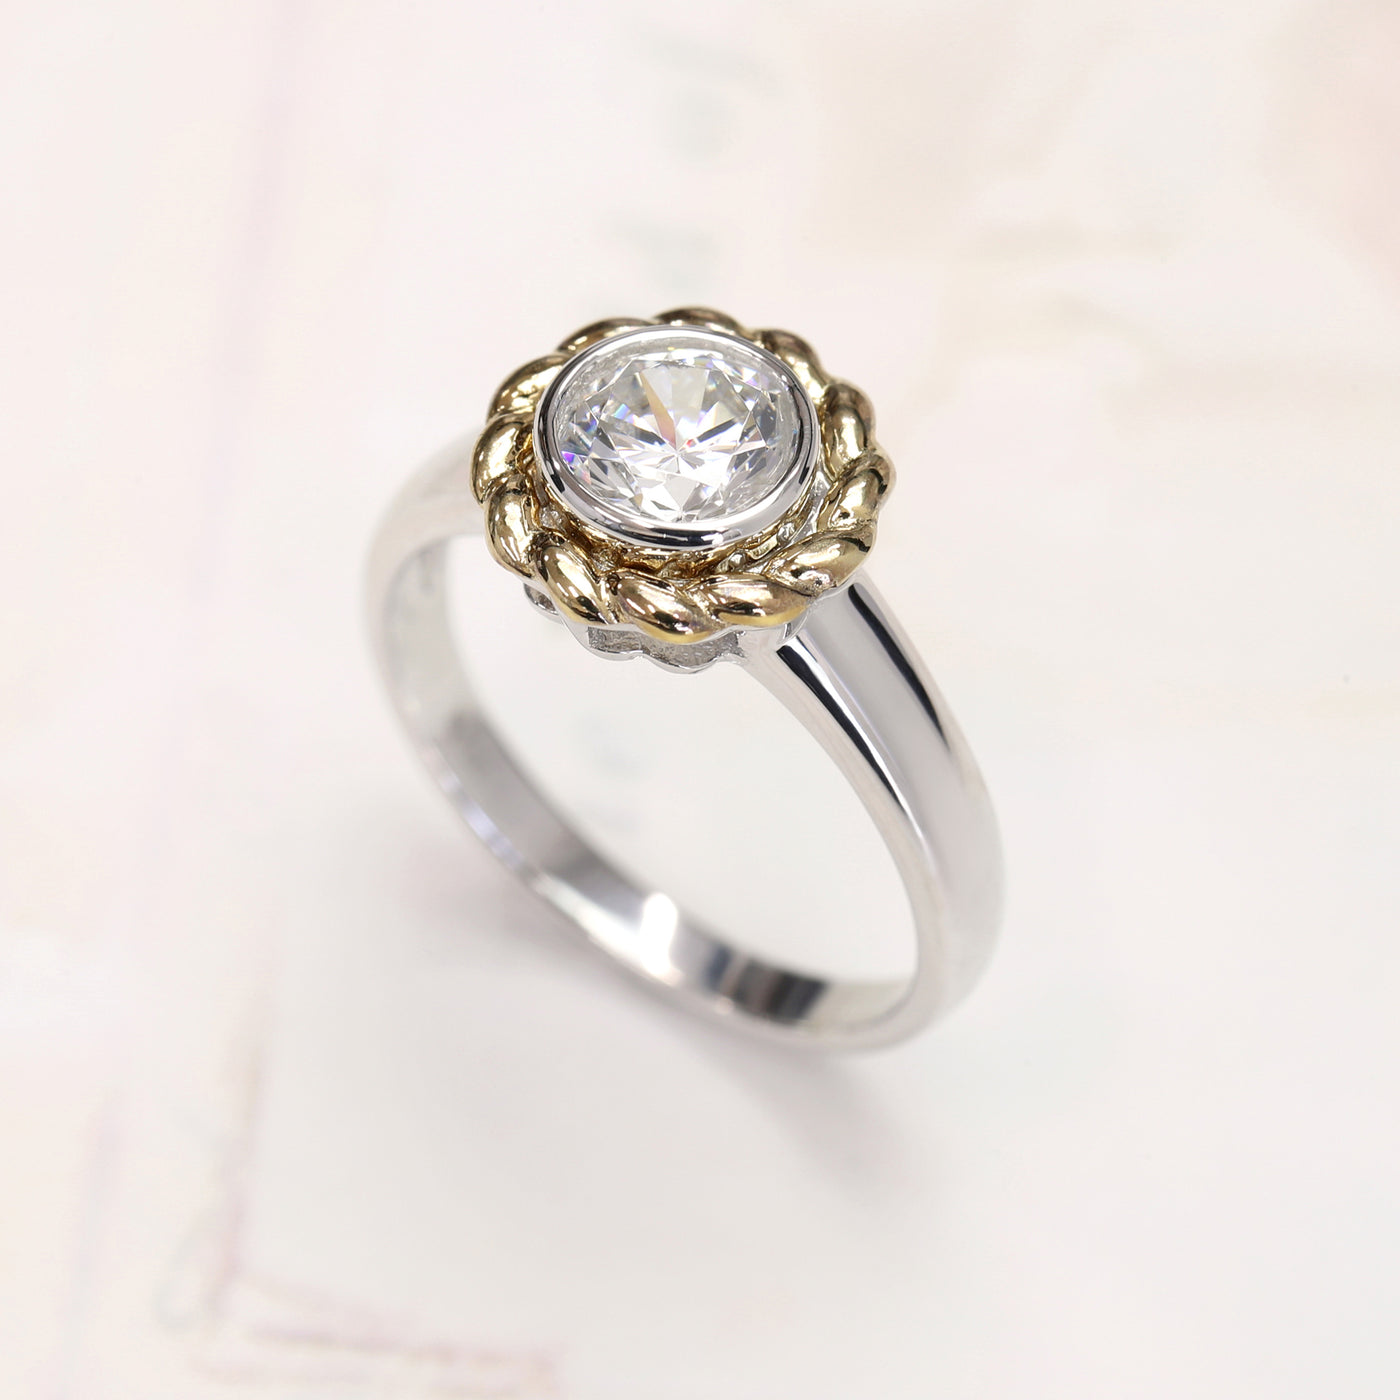 The Celestial Bloom Solitaire Ring